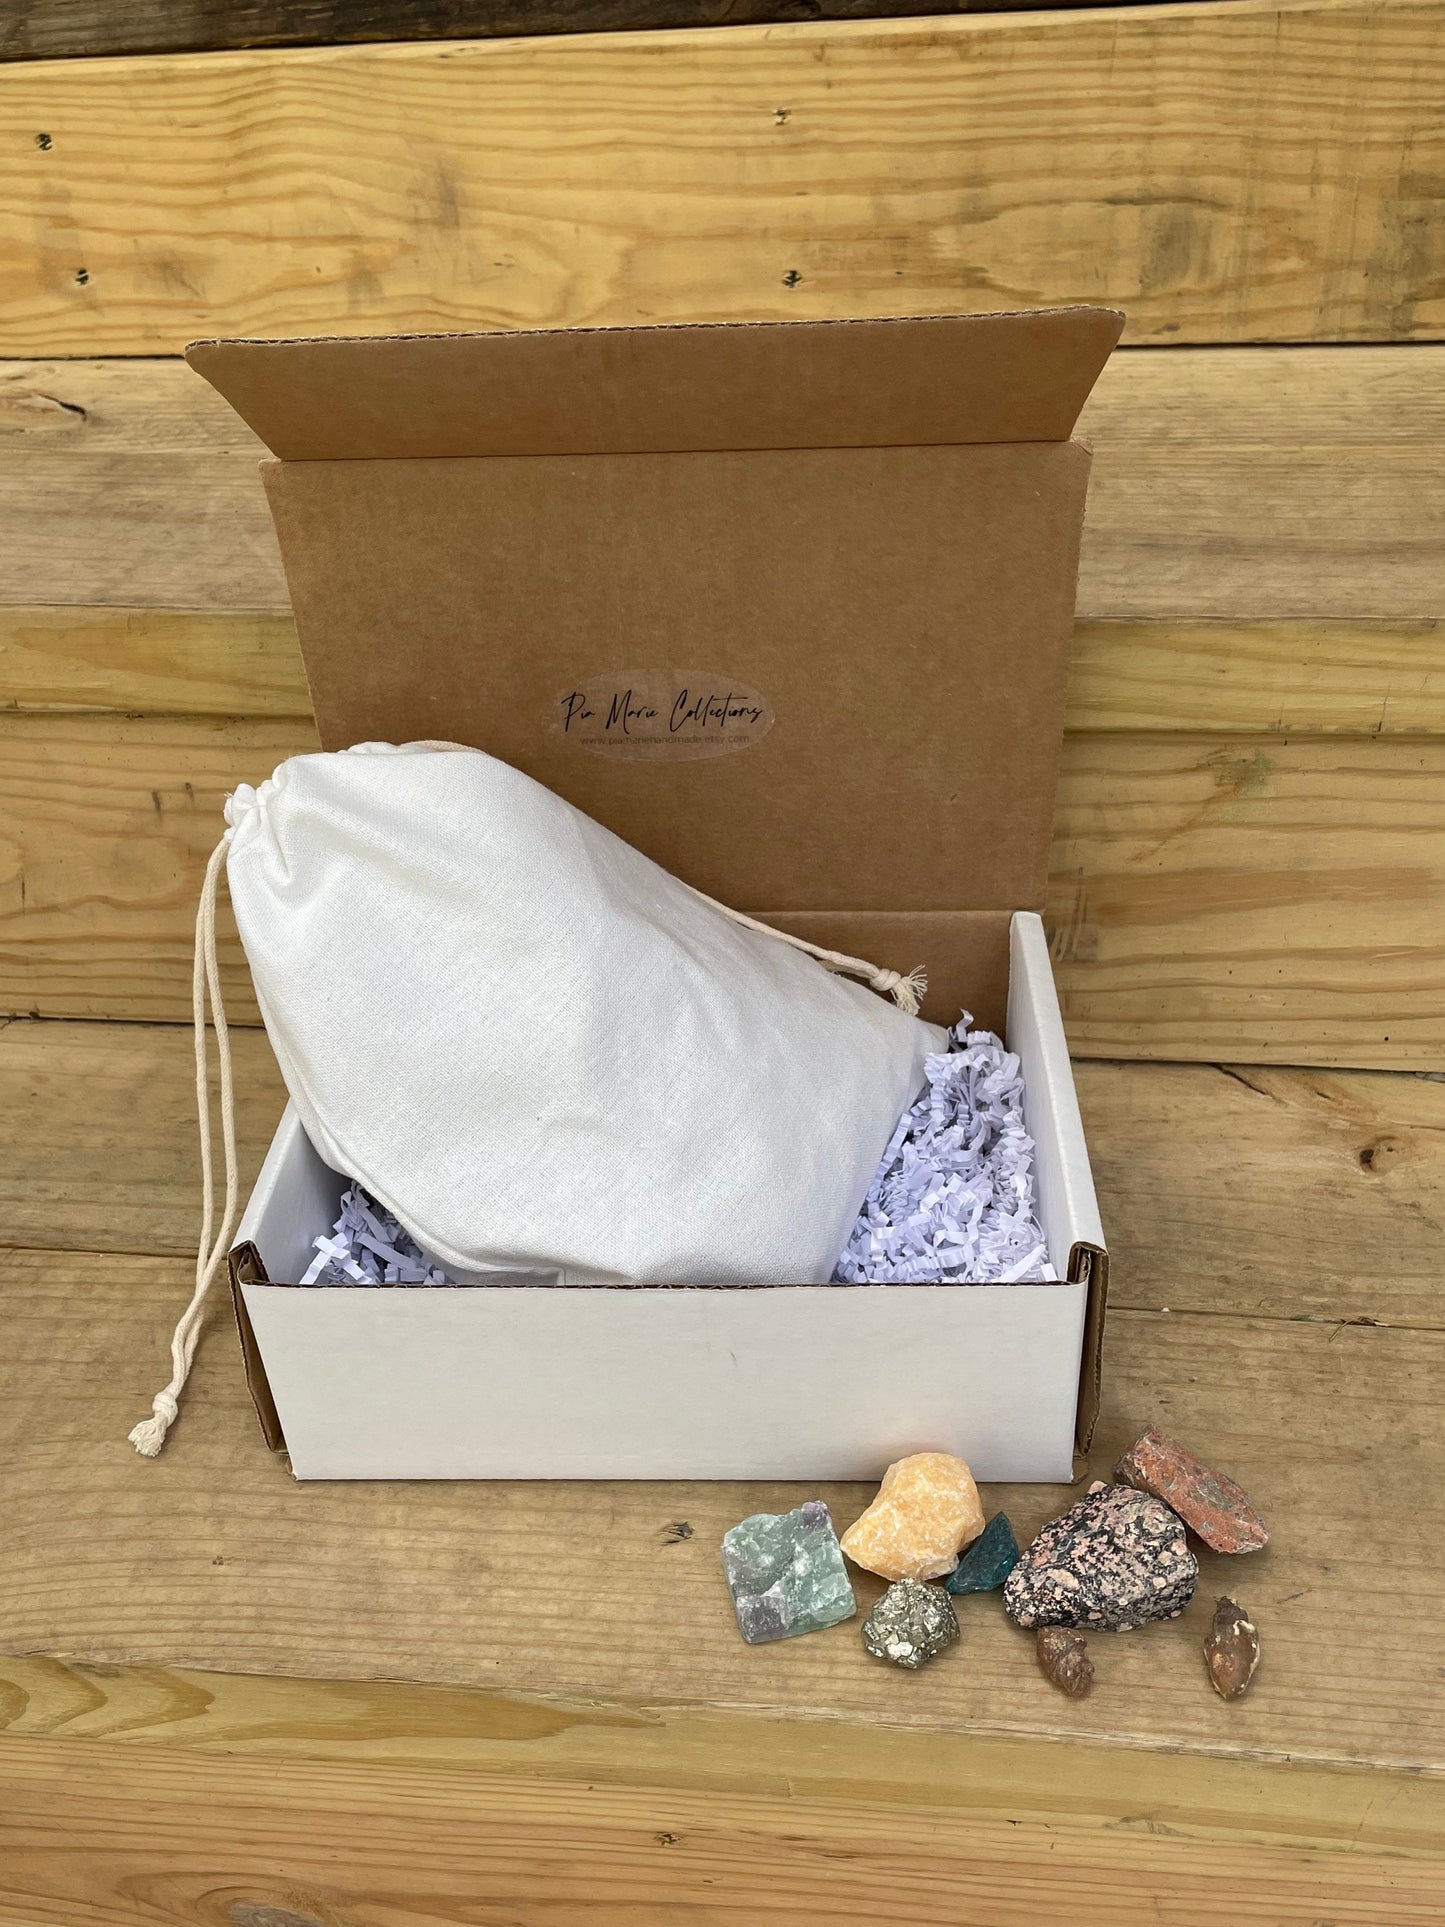 Rocks and Geodes, Gems and Minerals Gift Box, Crystal Gift Box, Science Learning Kit, Gift for Adults, Rock Gift for Kids, Geology Gift